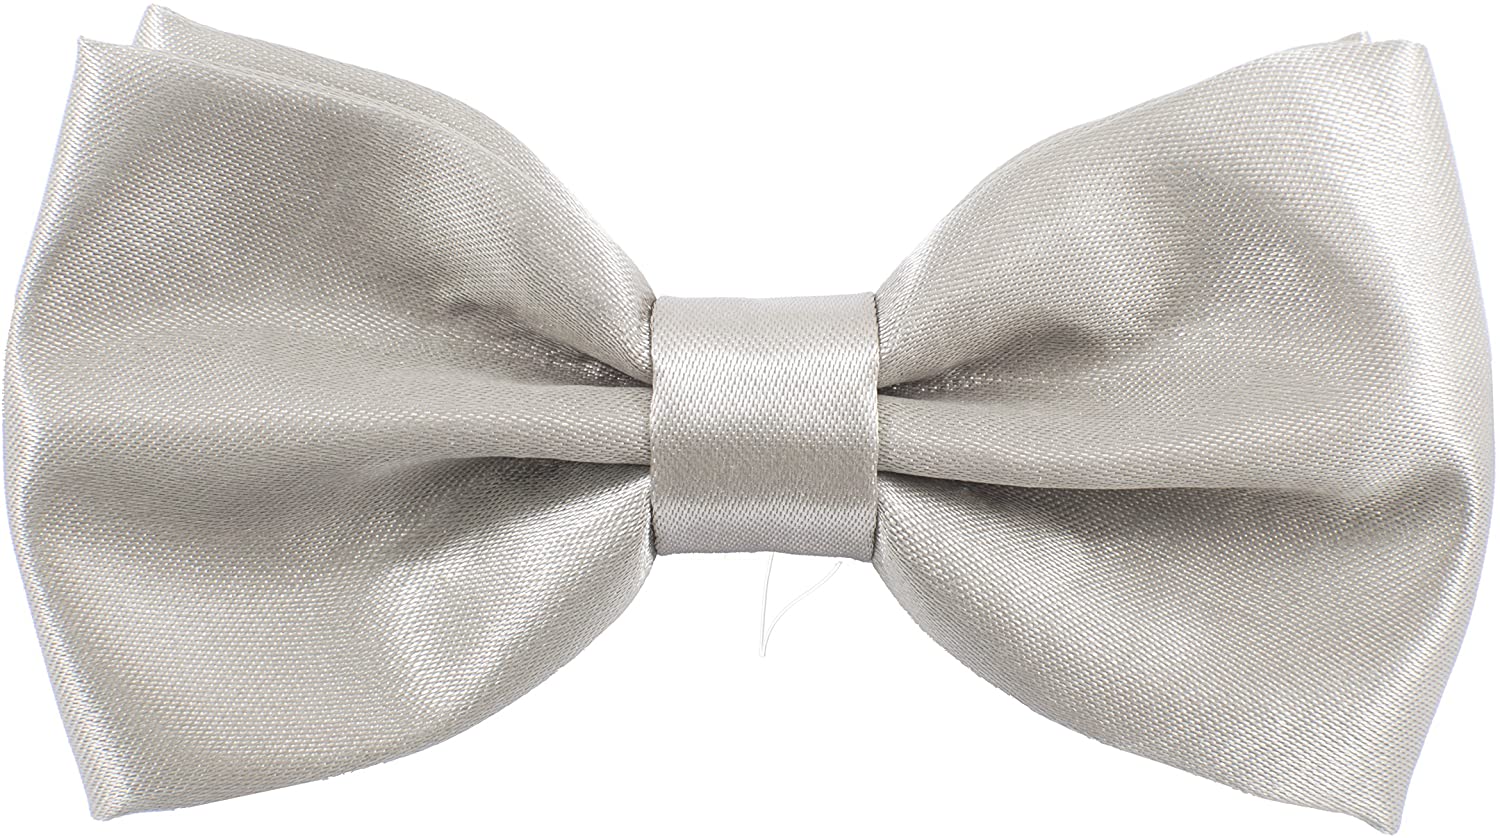 Satin Classic Pre-Tied Bow Tie Formal Solid Tuxedo for Adults & Children by Bow Tie House 